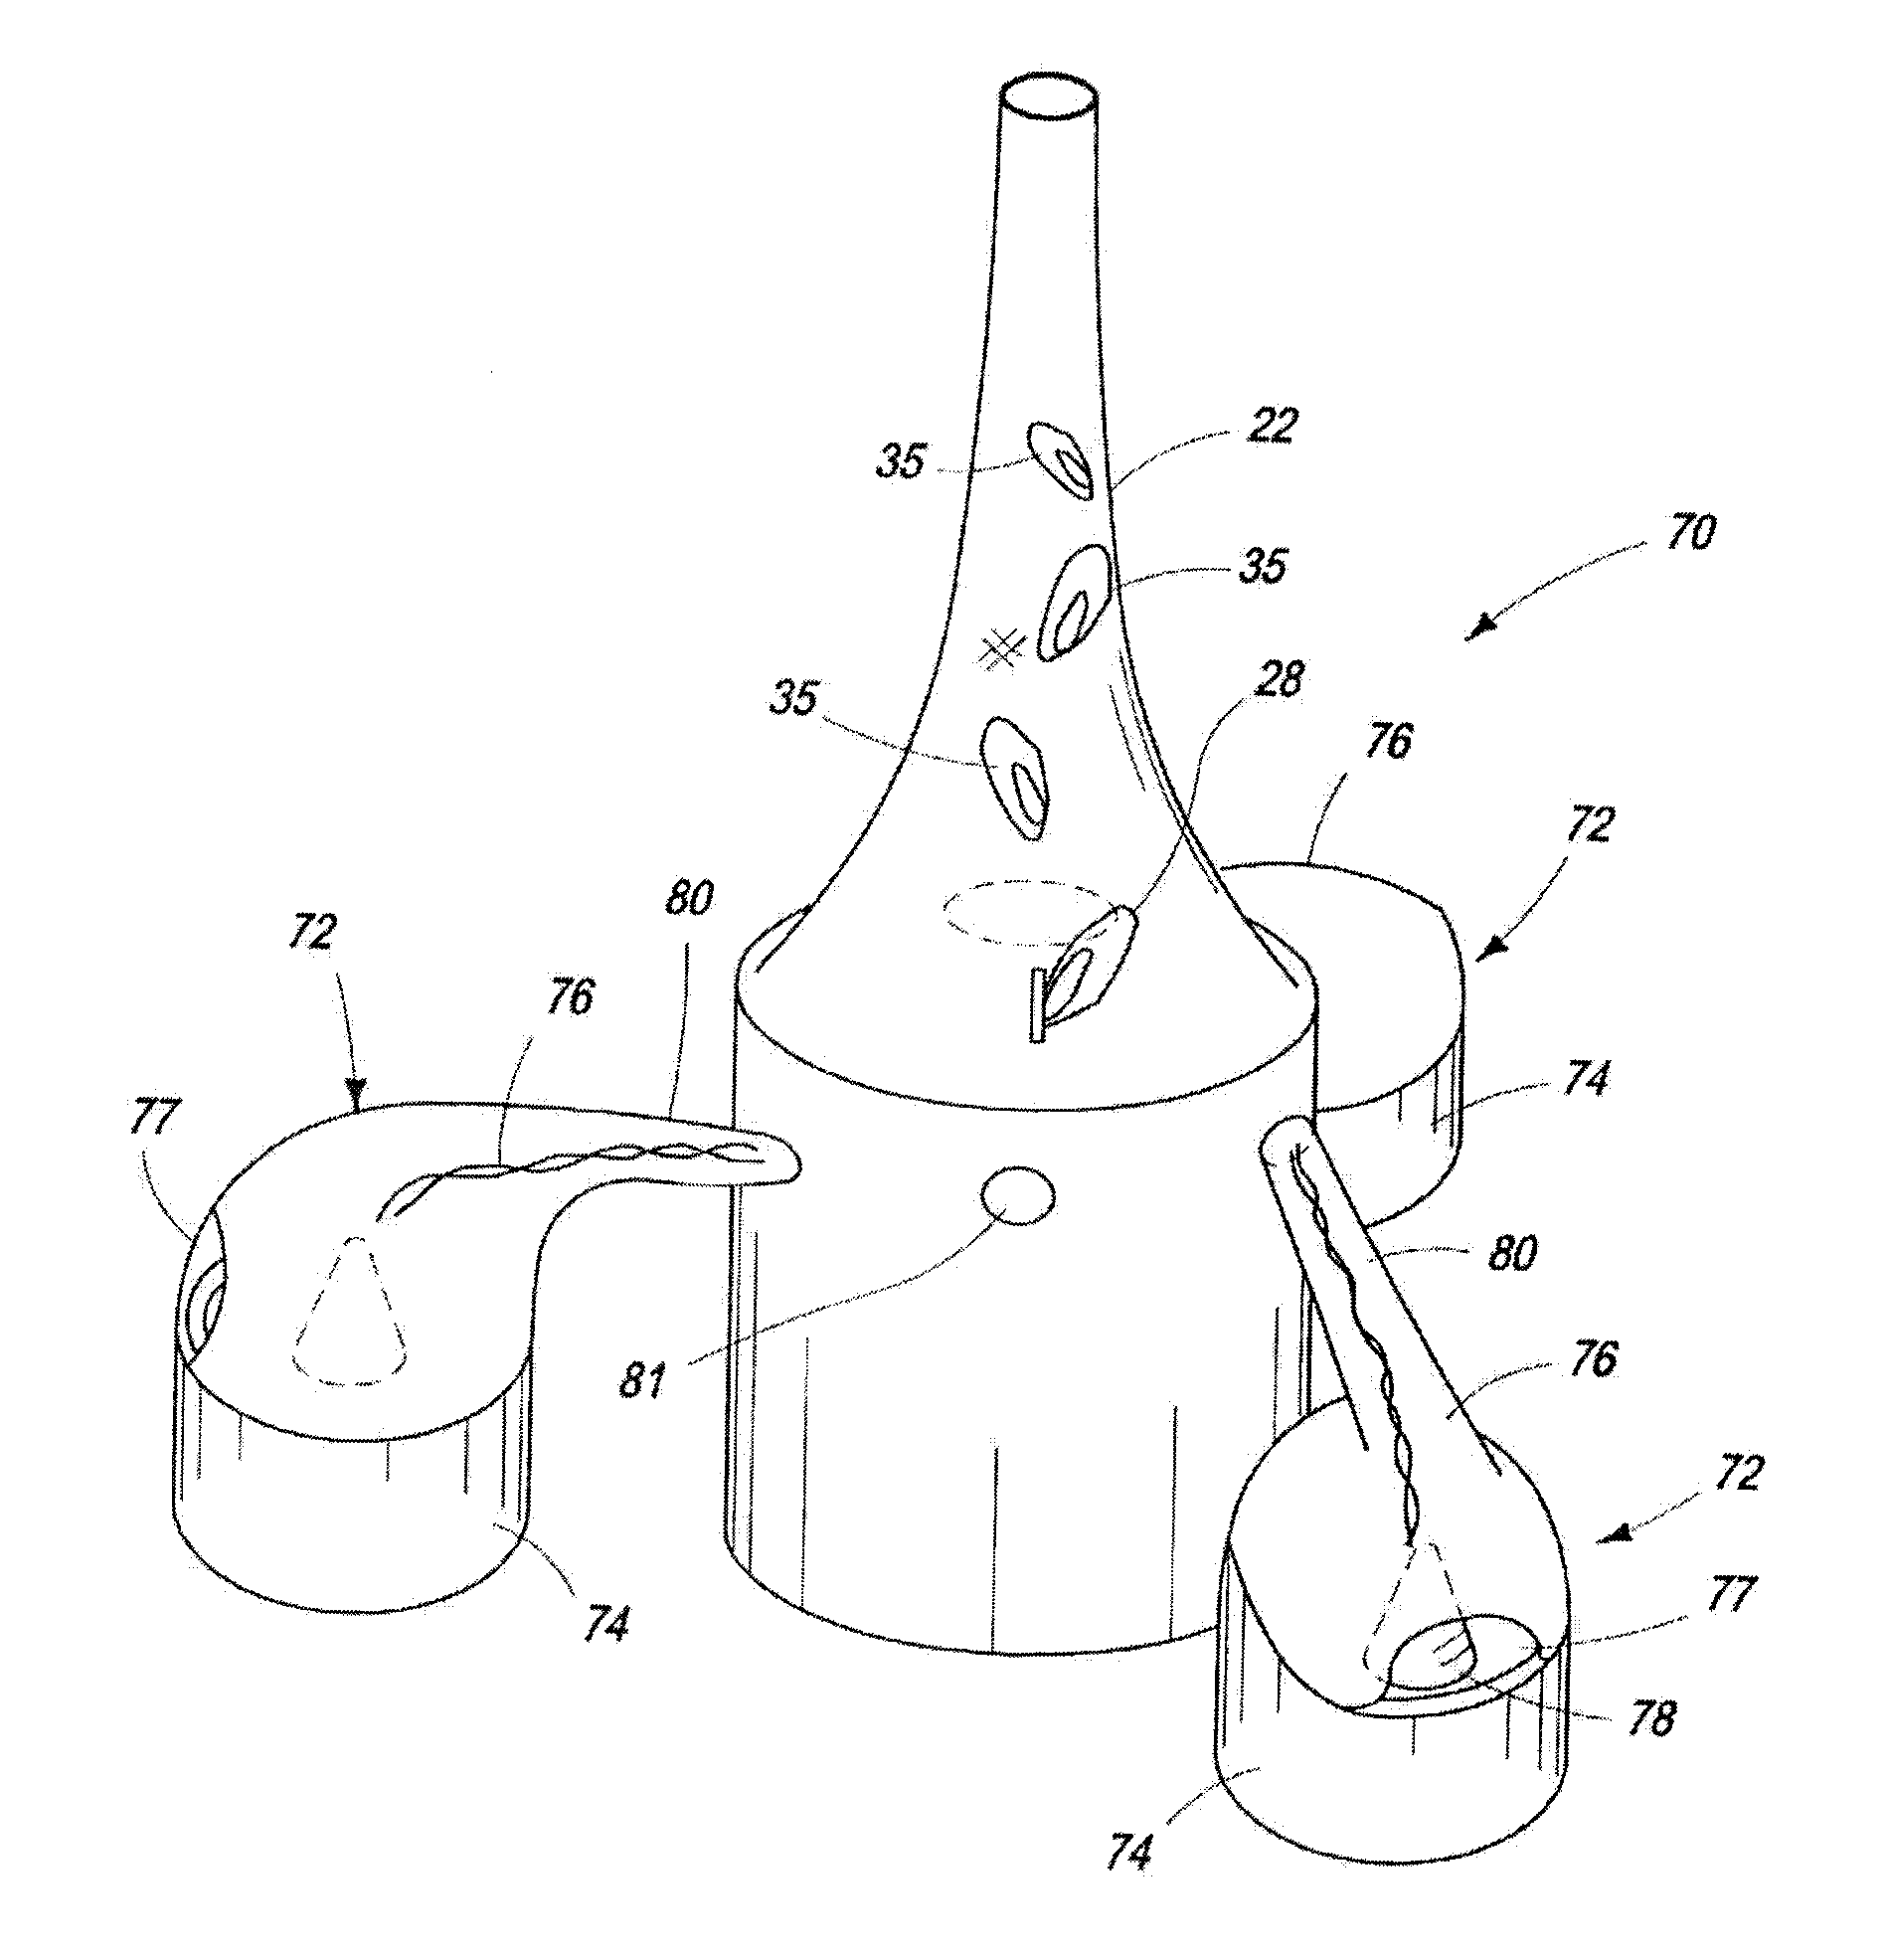 Apparatus and method for rotating a fire, a flame, a smoke plume, or for circulating heat and candle assembly therefor